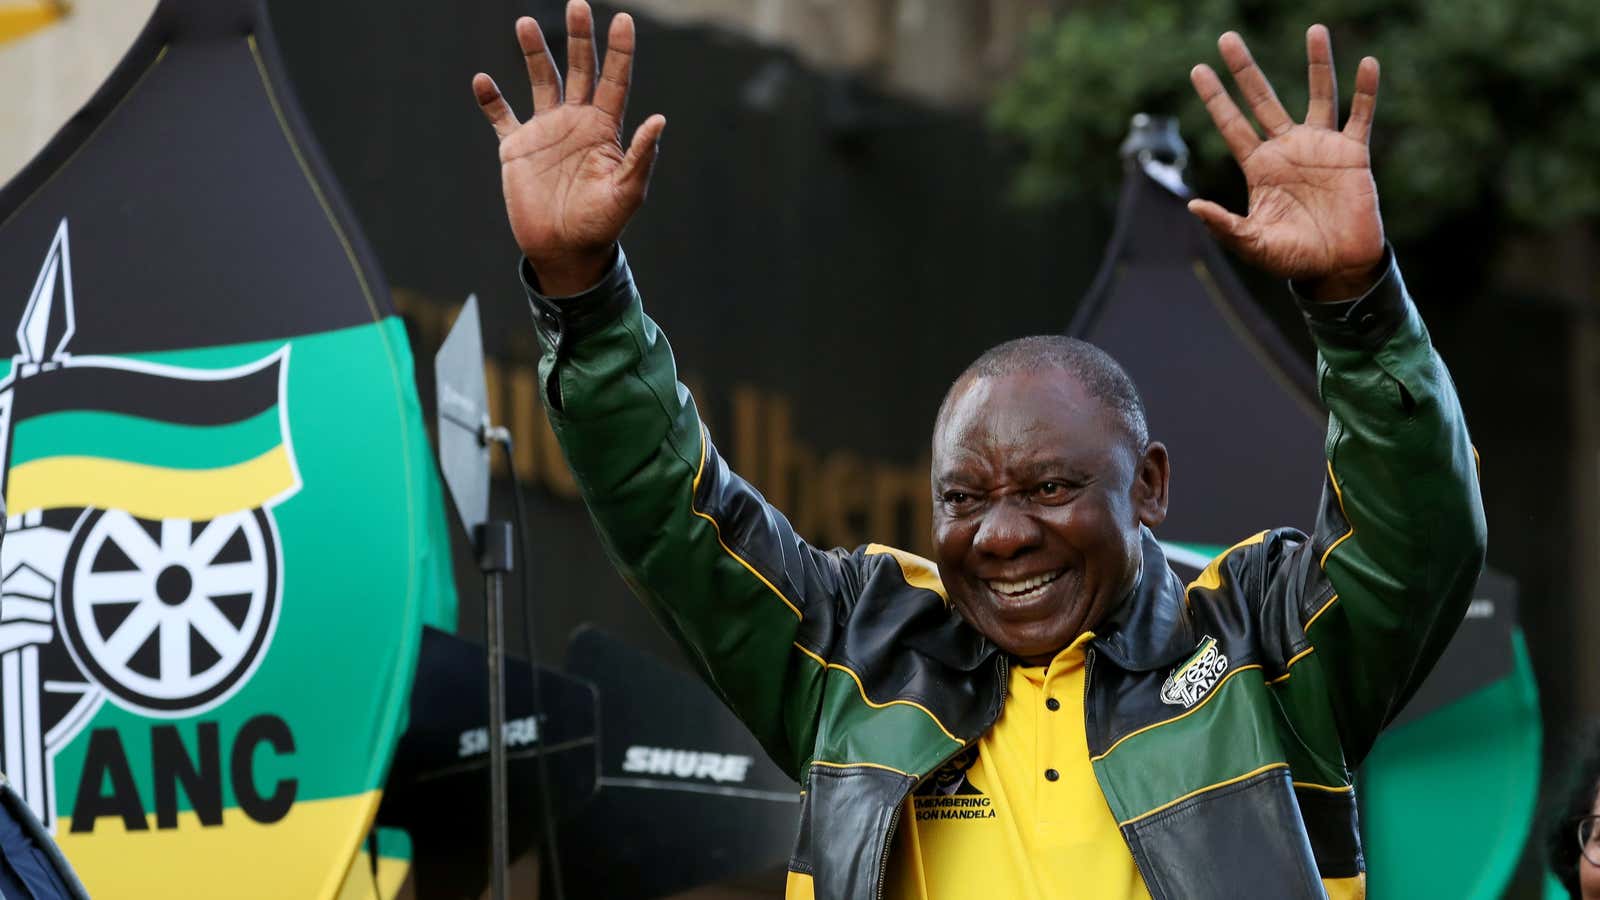 President Cyril Ramaphosa waves to supporters at an election victory rally in Johannesburg, South Africa,